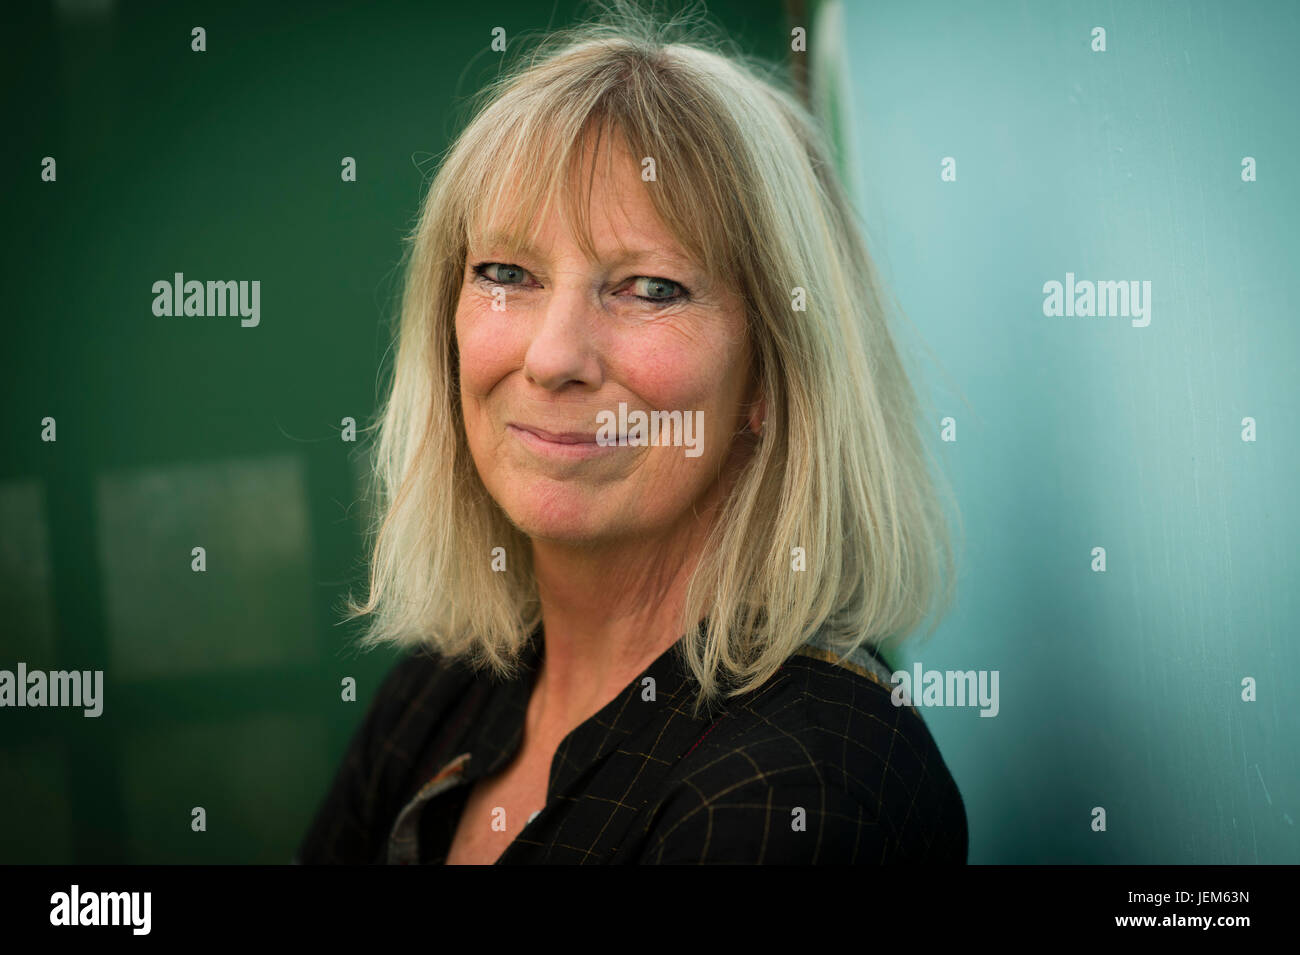 Lucy Hughes-Hallett , British cultural historian, biographer and novelist. Winner of the 2013  Samuel Johnson Prize for non-fiction for her biography of the Italian writer Gabriele D'Annunzio. Pictured at the 2017 Hay Festival of Literature and the Arts, Hay on Wye, Wales UK Stock Photo